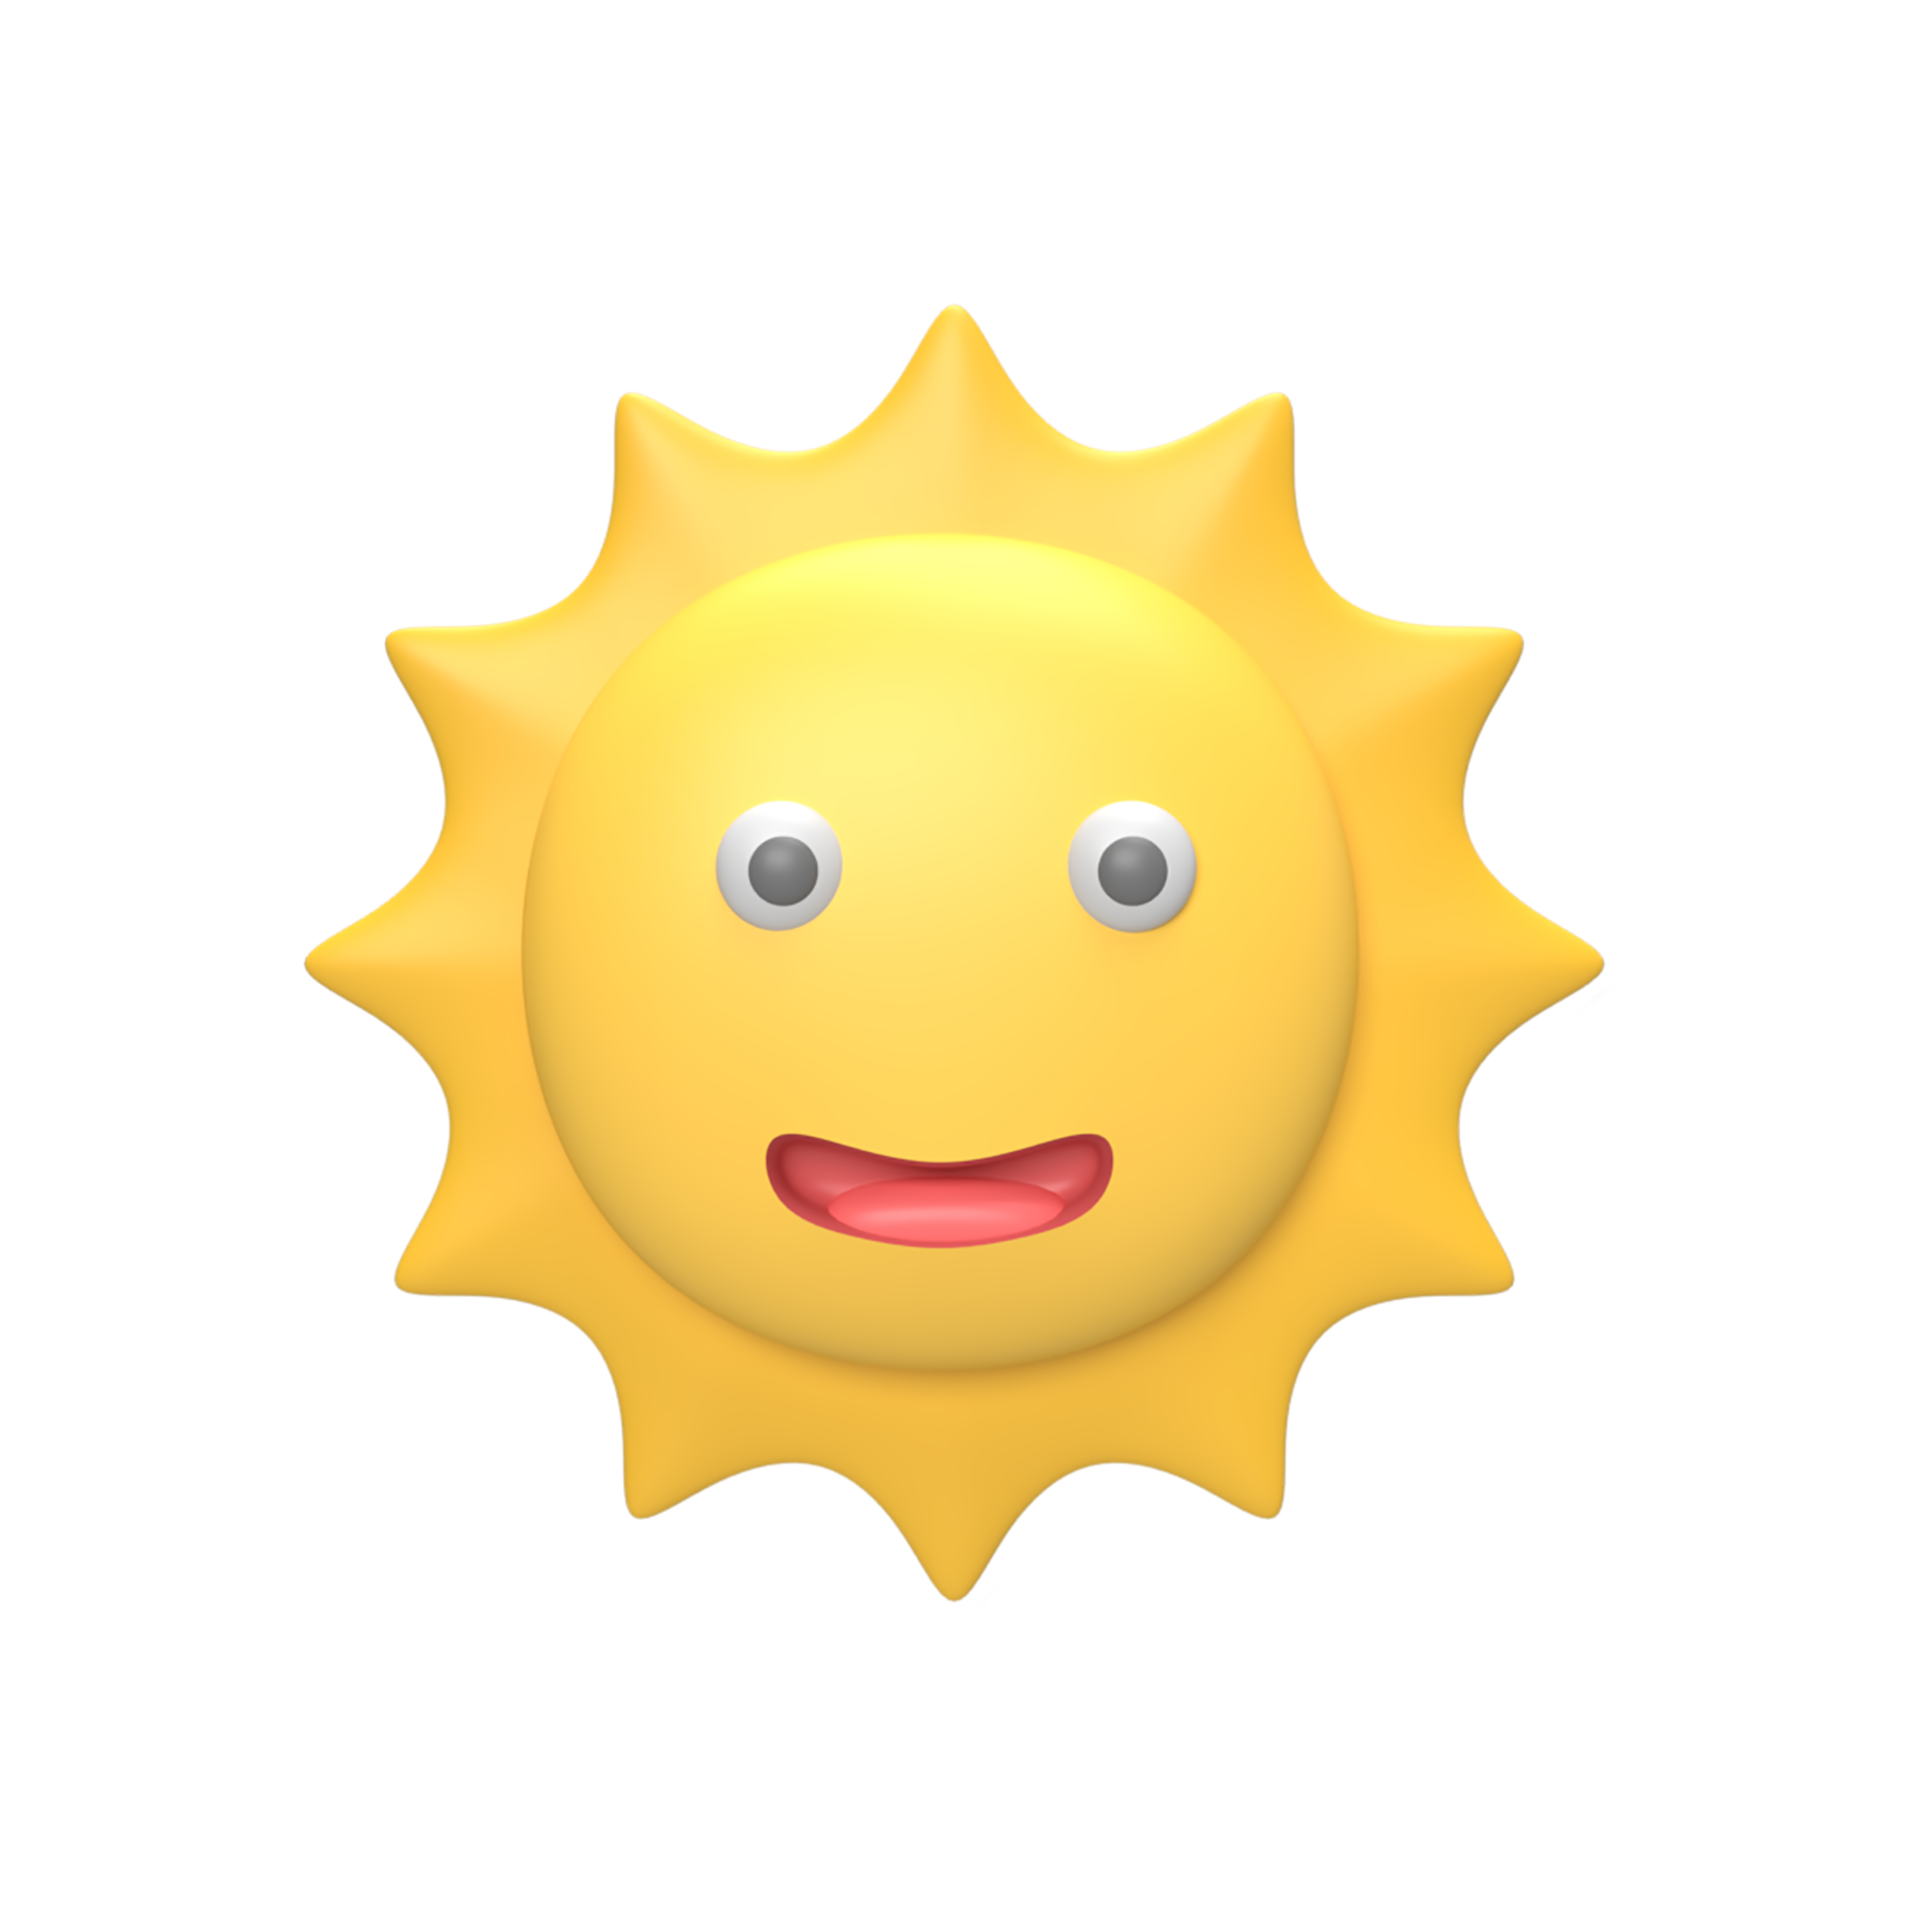 Free 3D Sun with smile face Cartoon style . Rendered object illustration  12794807 PNG with Transparent Background